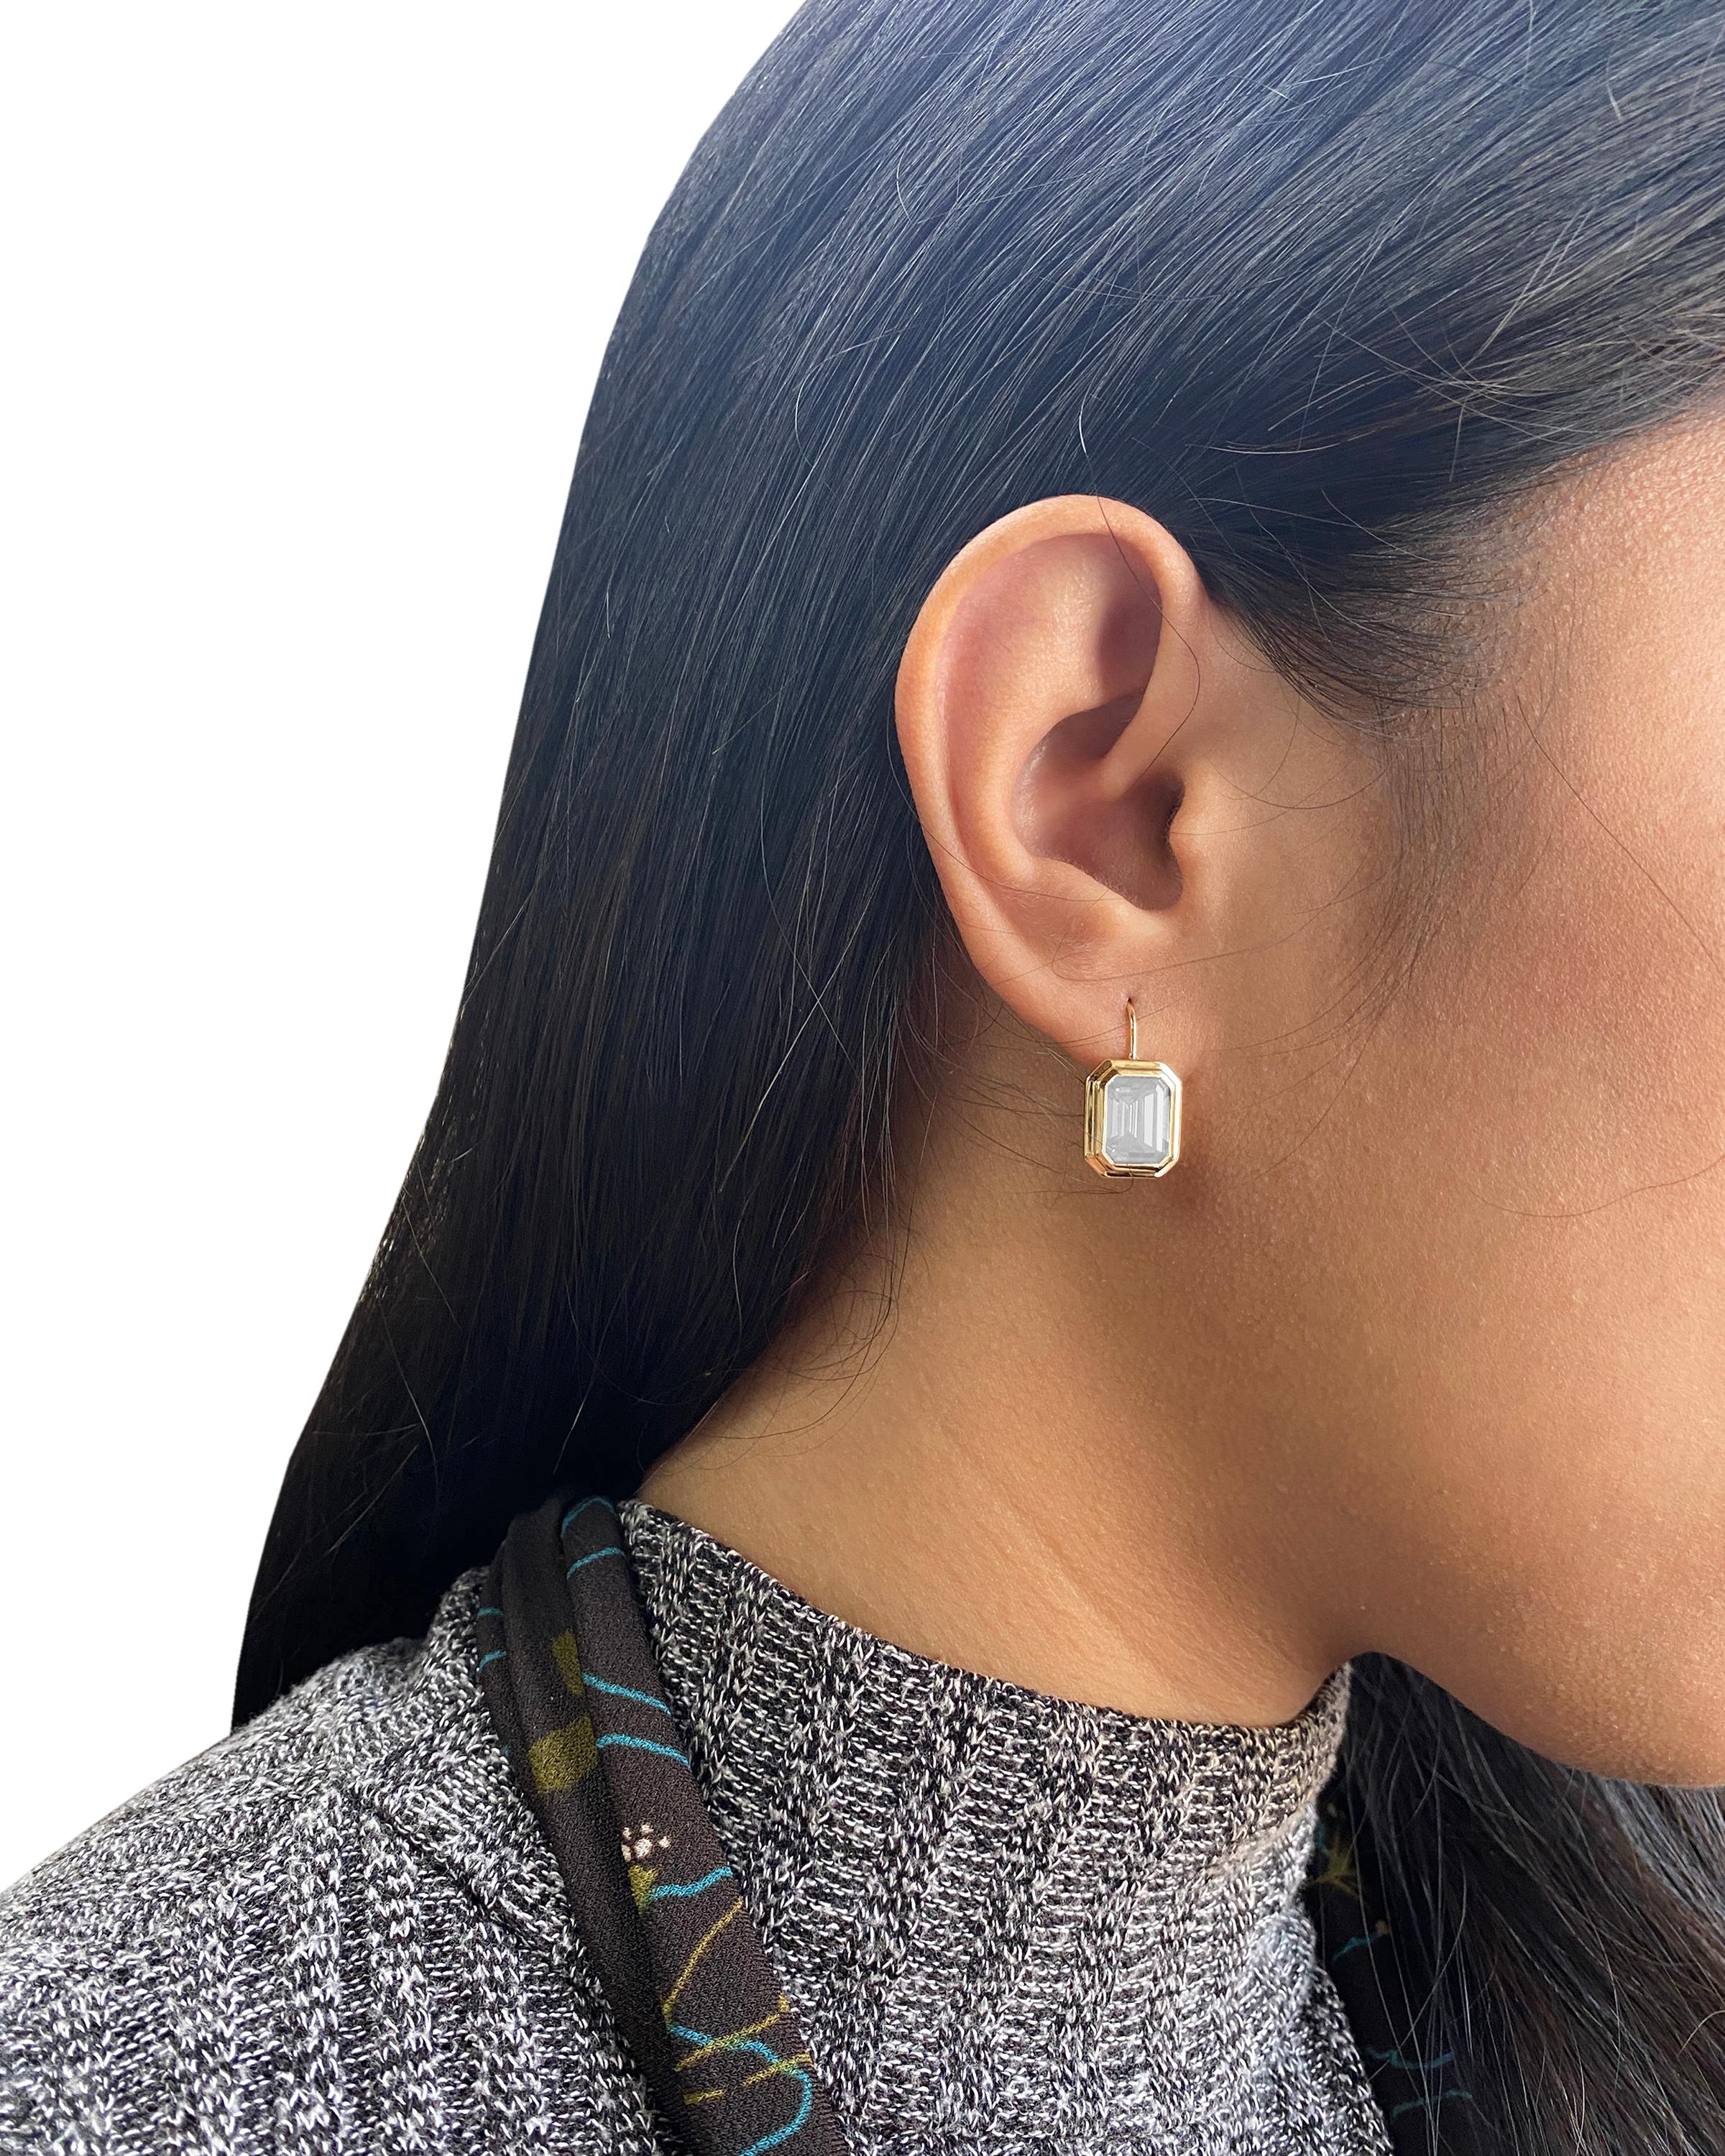 These Moon Quartz Emerald Cut Bezel Set Earrings on Wire in 18K Yellow Gold from the 'Manhattan Collection are a stunning and sophisticated jewelry piece. These earrings feature exquisite Moon Quartz gemstones with an elegant emerald cut, cradled in